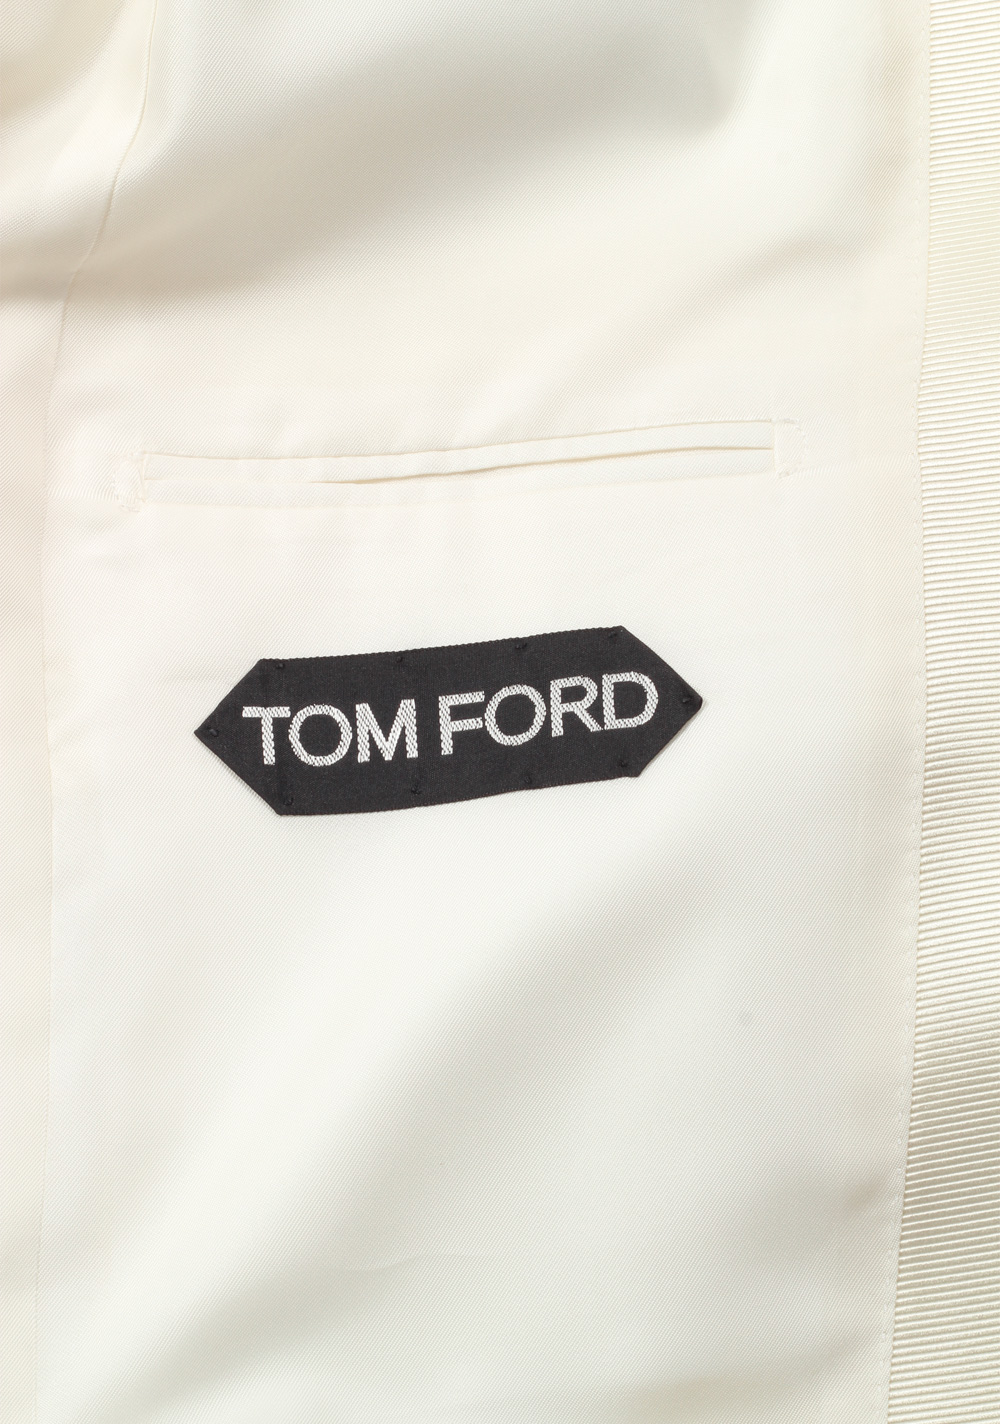 TOM FORD Windsor Ivory Signature Tuxedo Dinner Jacket Size 52 / 42R U.S. Fit A | Costume Limité